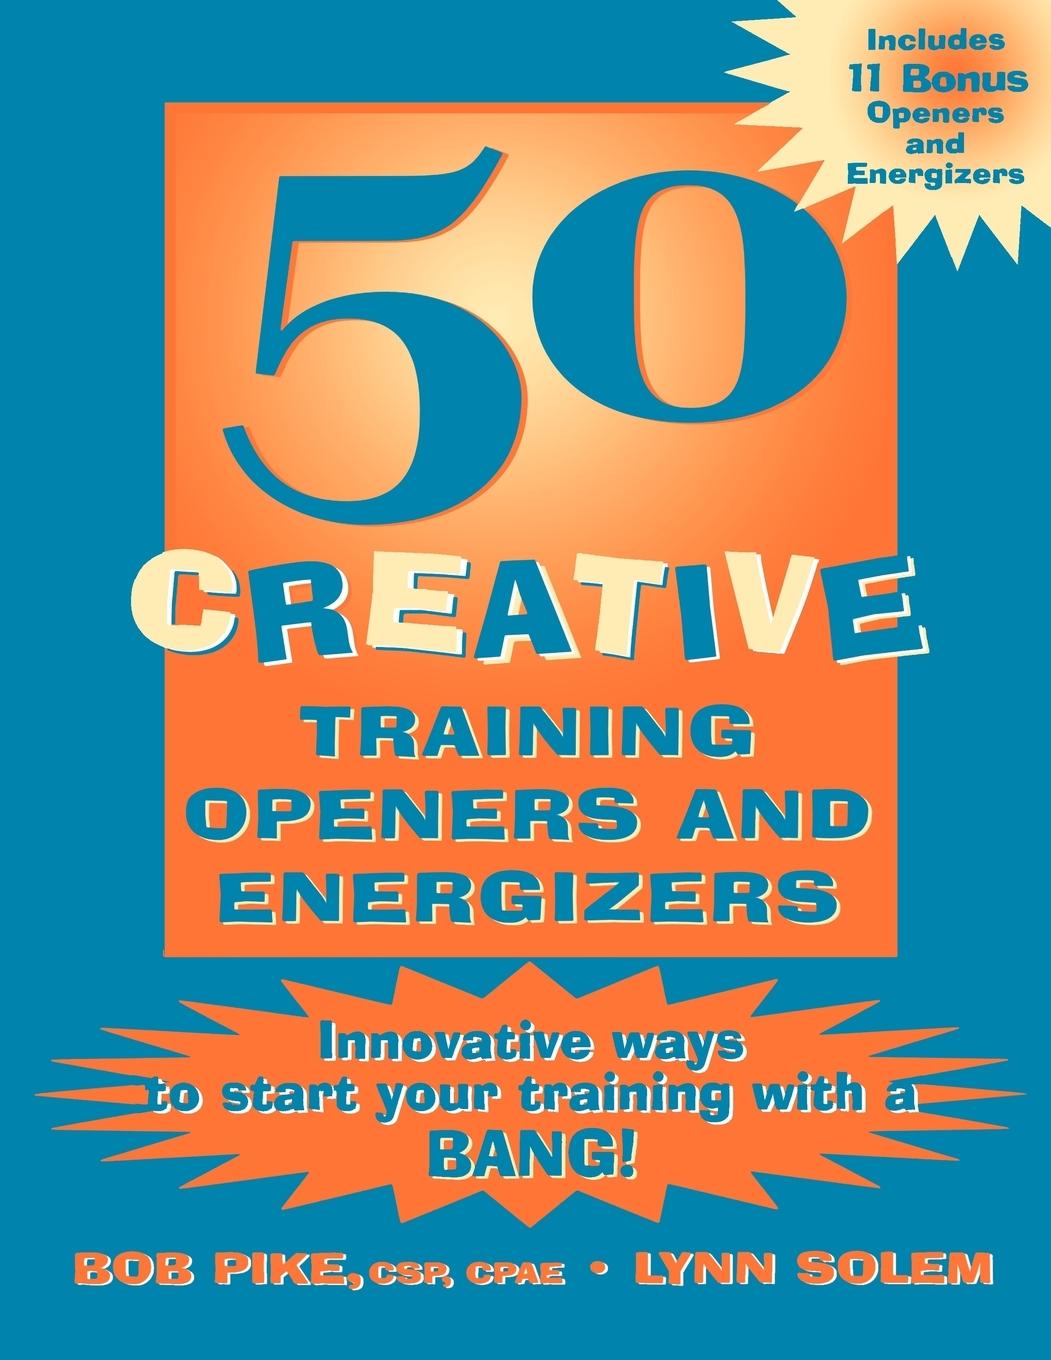 50 Creative Training Openers and Energizers - Pike, Bob Betsy|Pike, Robert W.